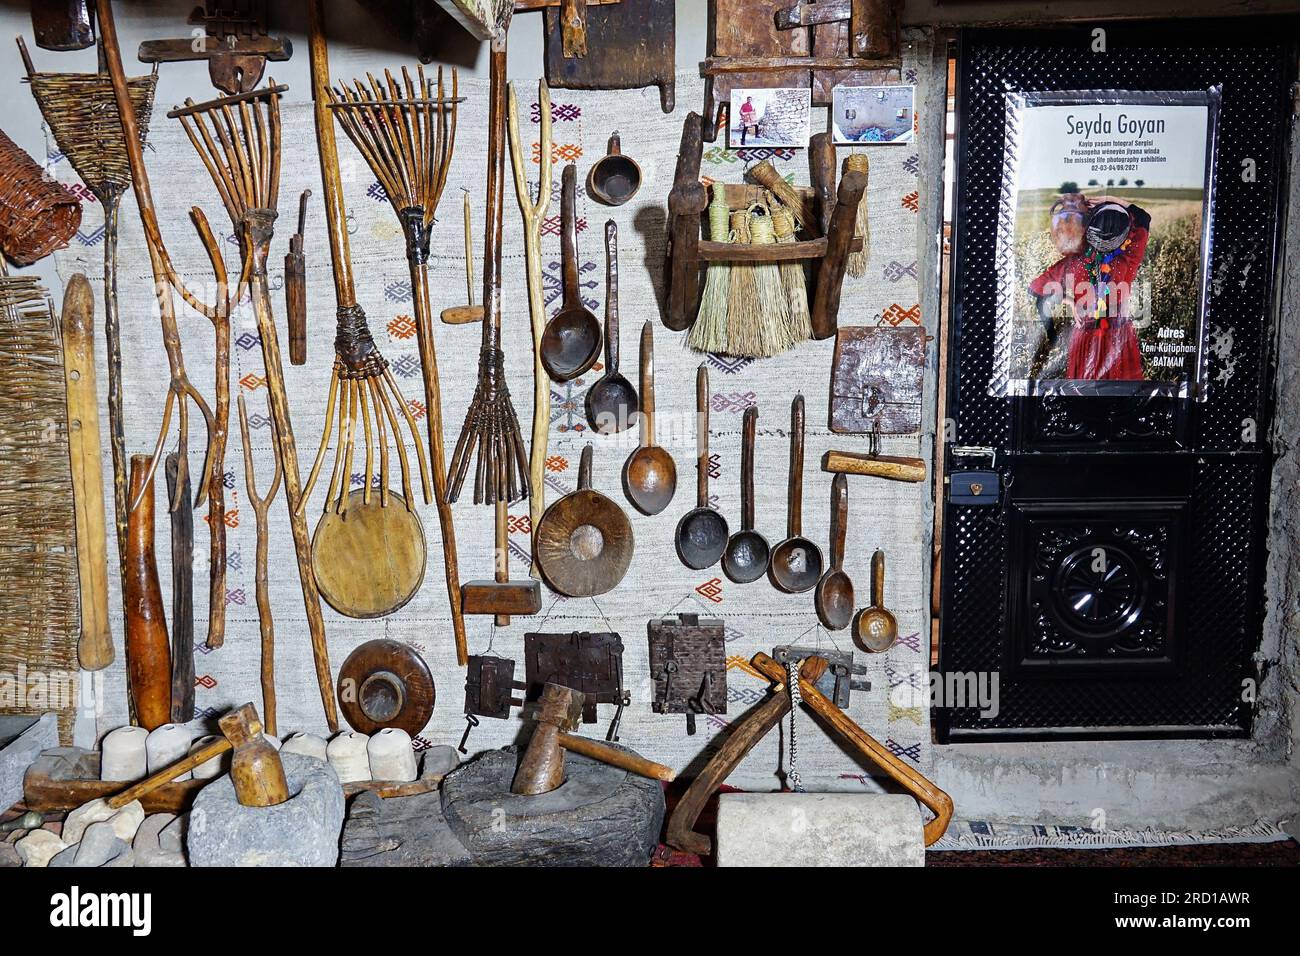 July 15, 2023, Uludere, Turkey: The old tools found at the Kurdish Ethnography Museum, used by the Kurds in agriculture and cuisine, are pictured. Folklorist Seyda Goyan, who has written 6 books about Kurdish folklore, founded the ''Seyda Goyan Kurdish Ethnography Museum'', where about a thousand ethnographic works are stored and exhibited with his own means. Seyda Goyan, who could not find an exhibition place for the works he collected in three years, made her 2-room historical house a museum in the Uludere district of Sirnak province in Turkey. (Credit Image: © Mehmet Masum Suer/SOPA Images Stock Photo